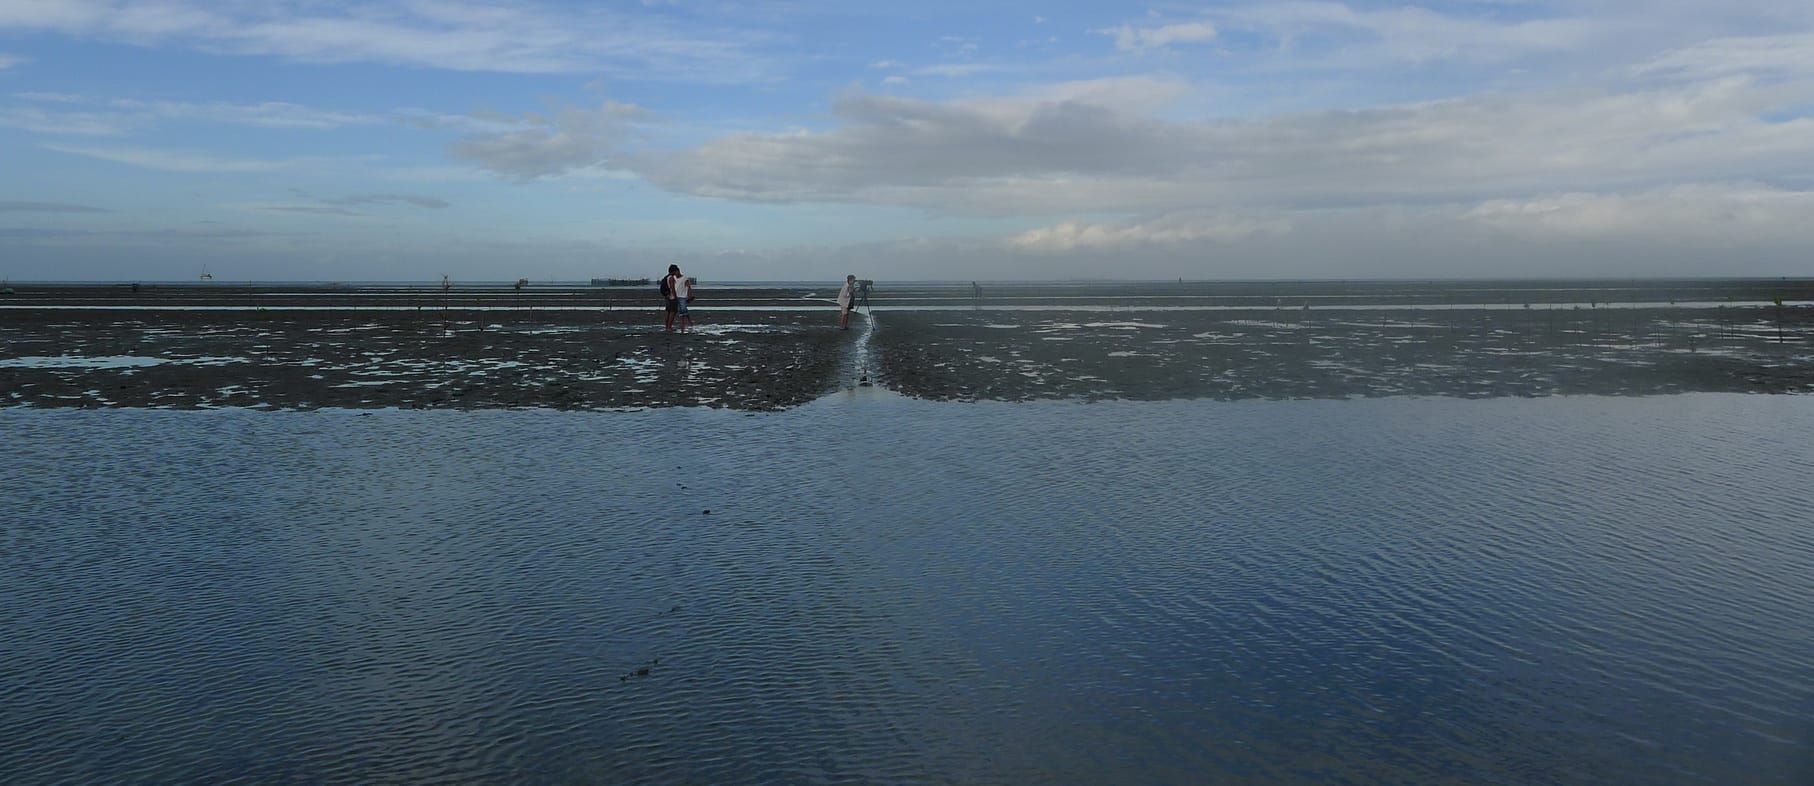 The entrance to the mudflats of Tibsoc. Photo by Christian Perez.